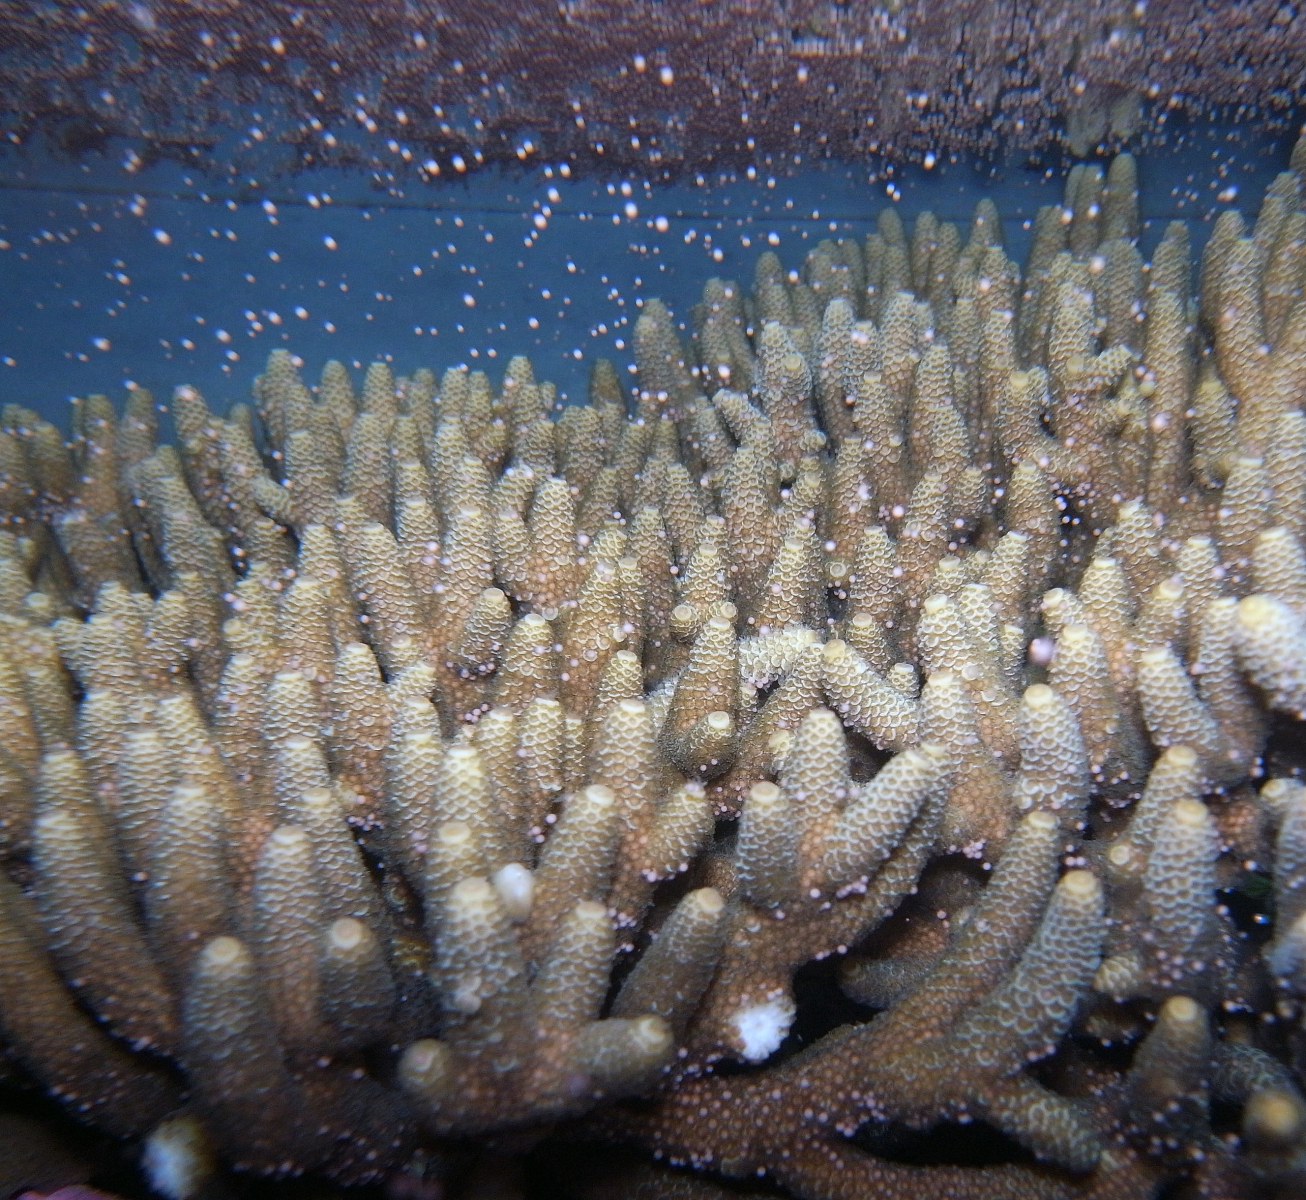 How can more than 100 different species of coral spawn at the same time?